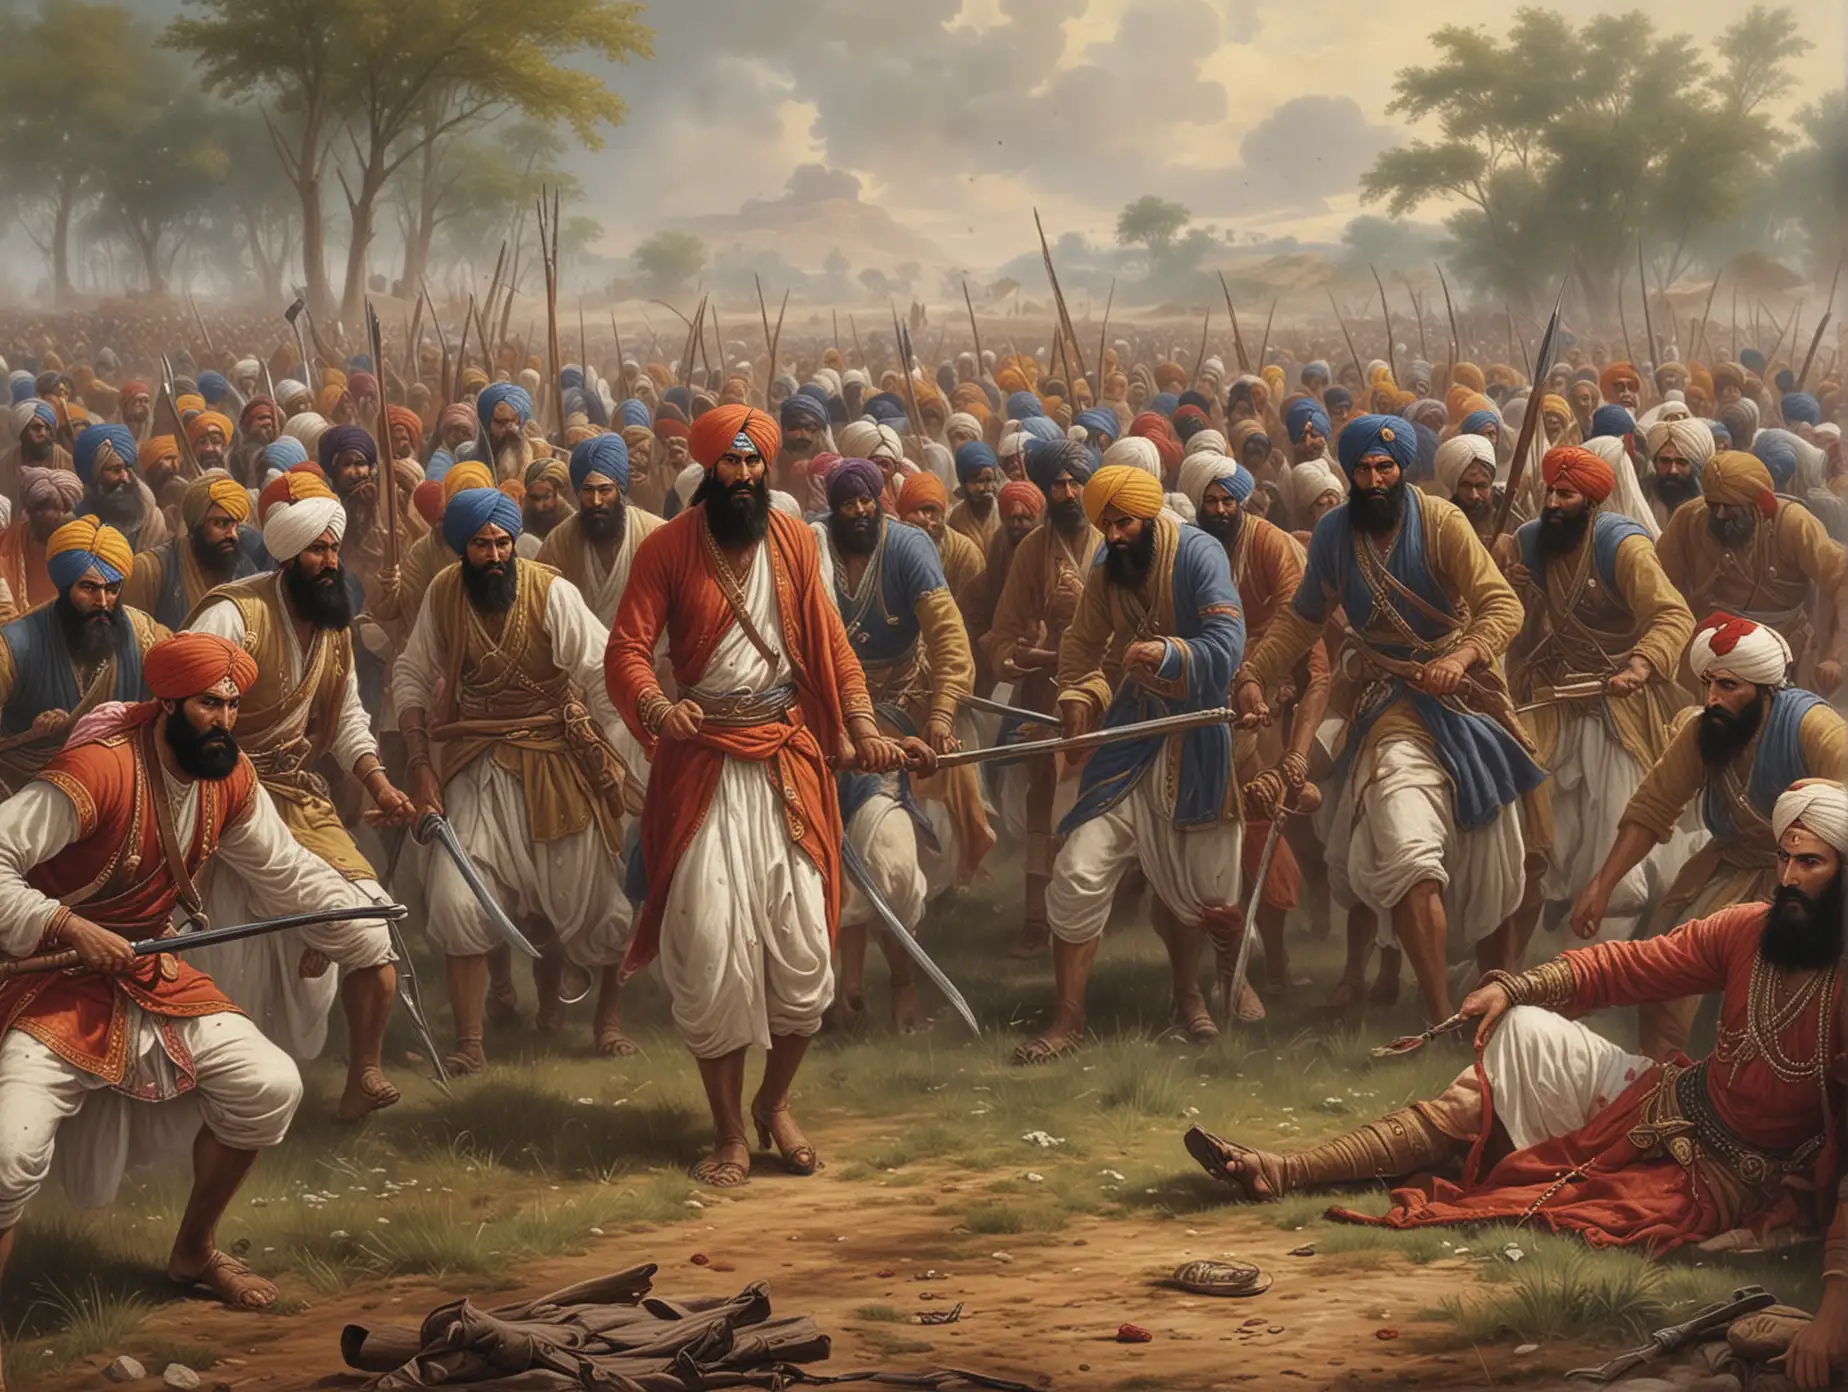 Sikh men and women in battle, blood, wounded, but not defeated.